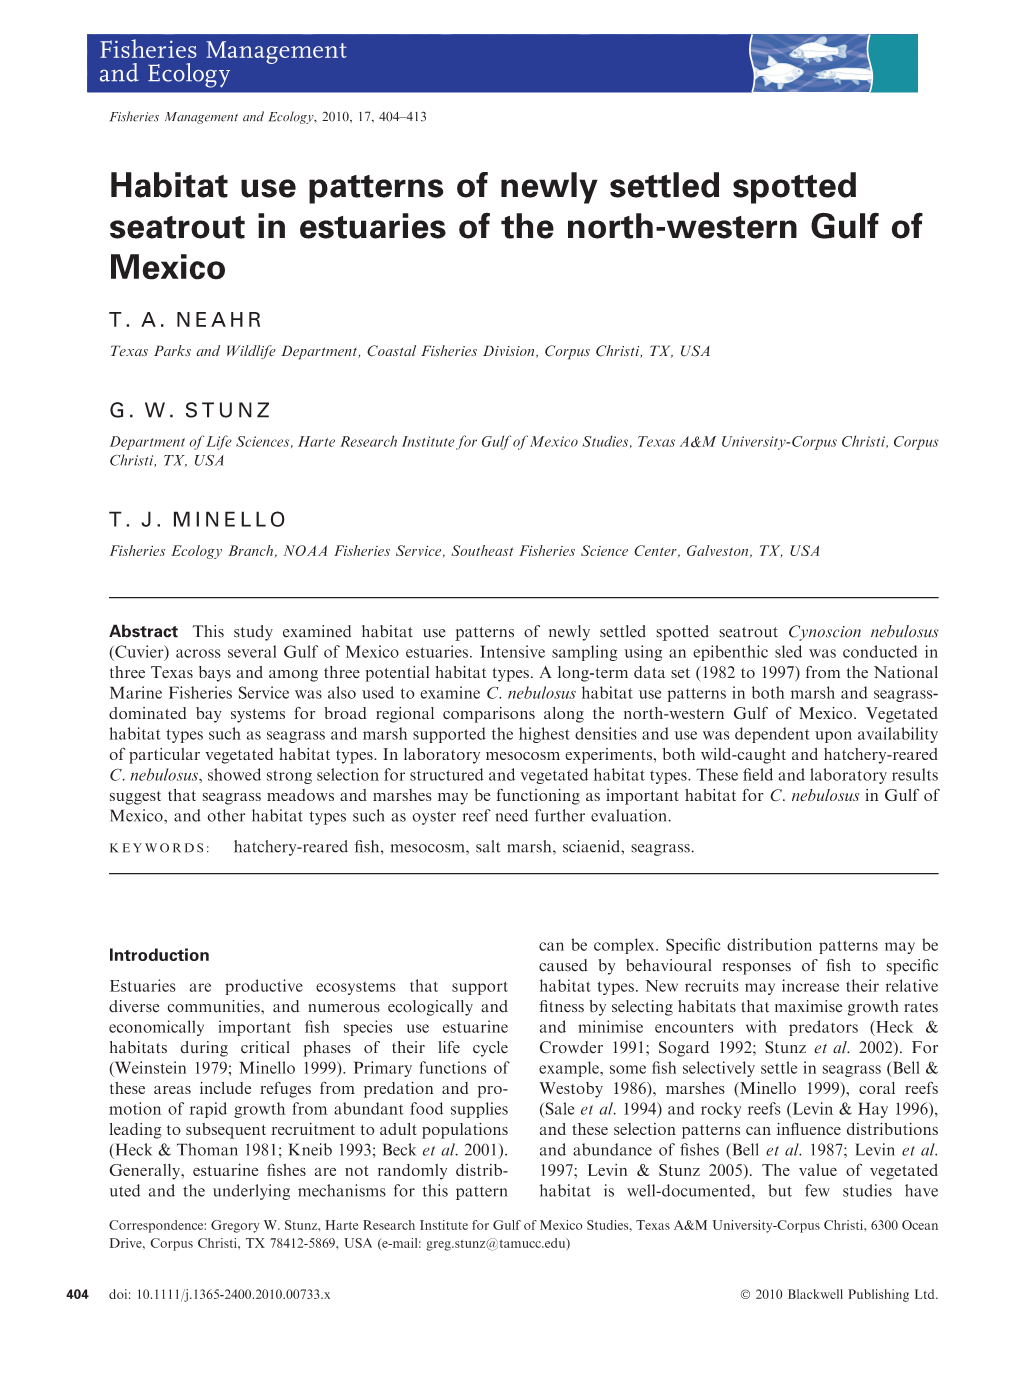 Habitat Use Patterns of Newly Settled Spotted Seatrout in Estuaries of the North-Western Gulf of Mexico